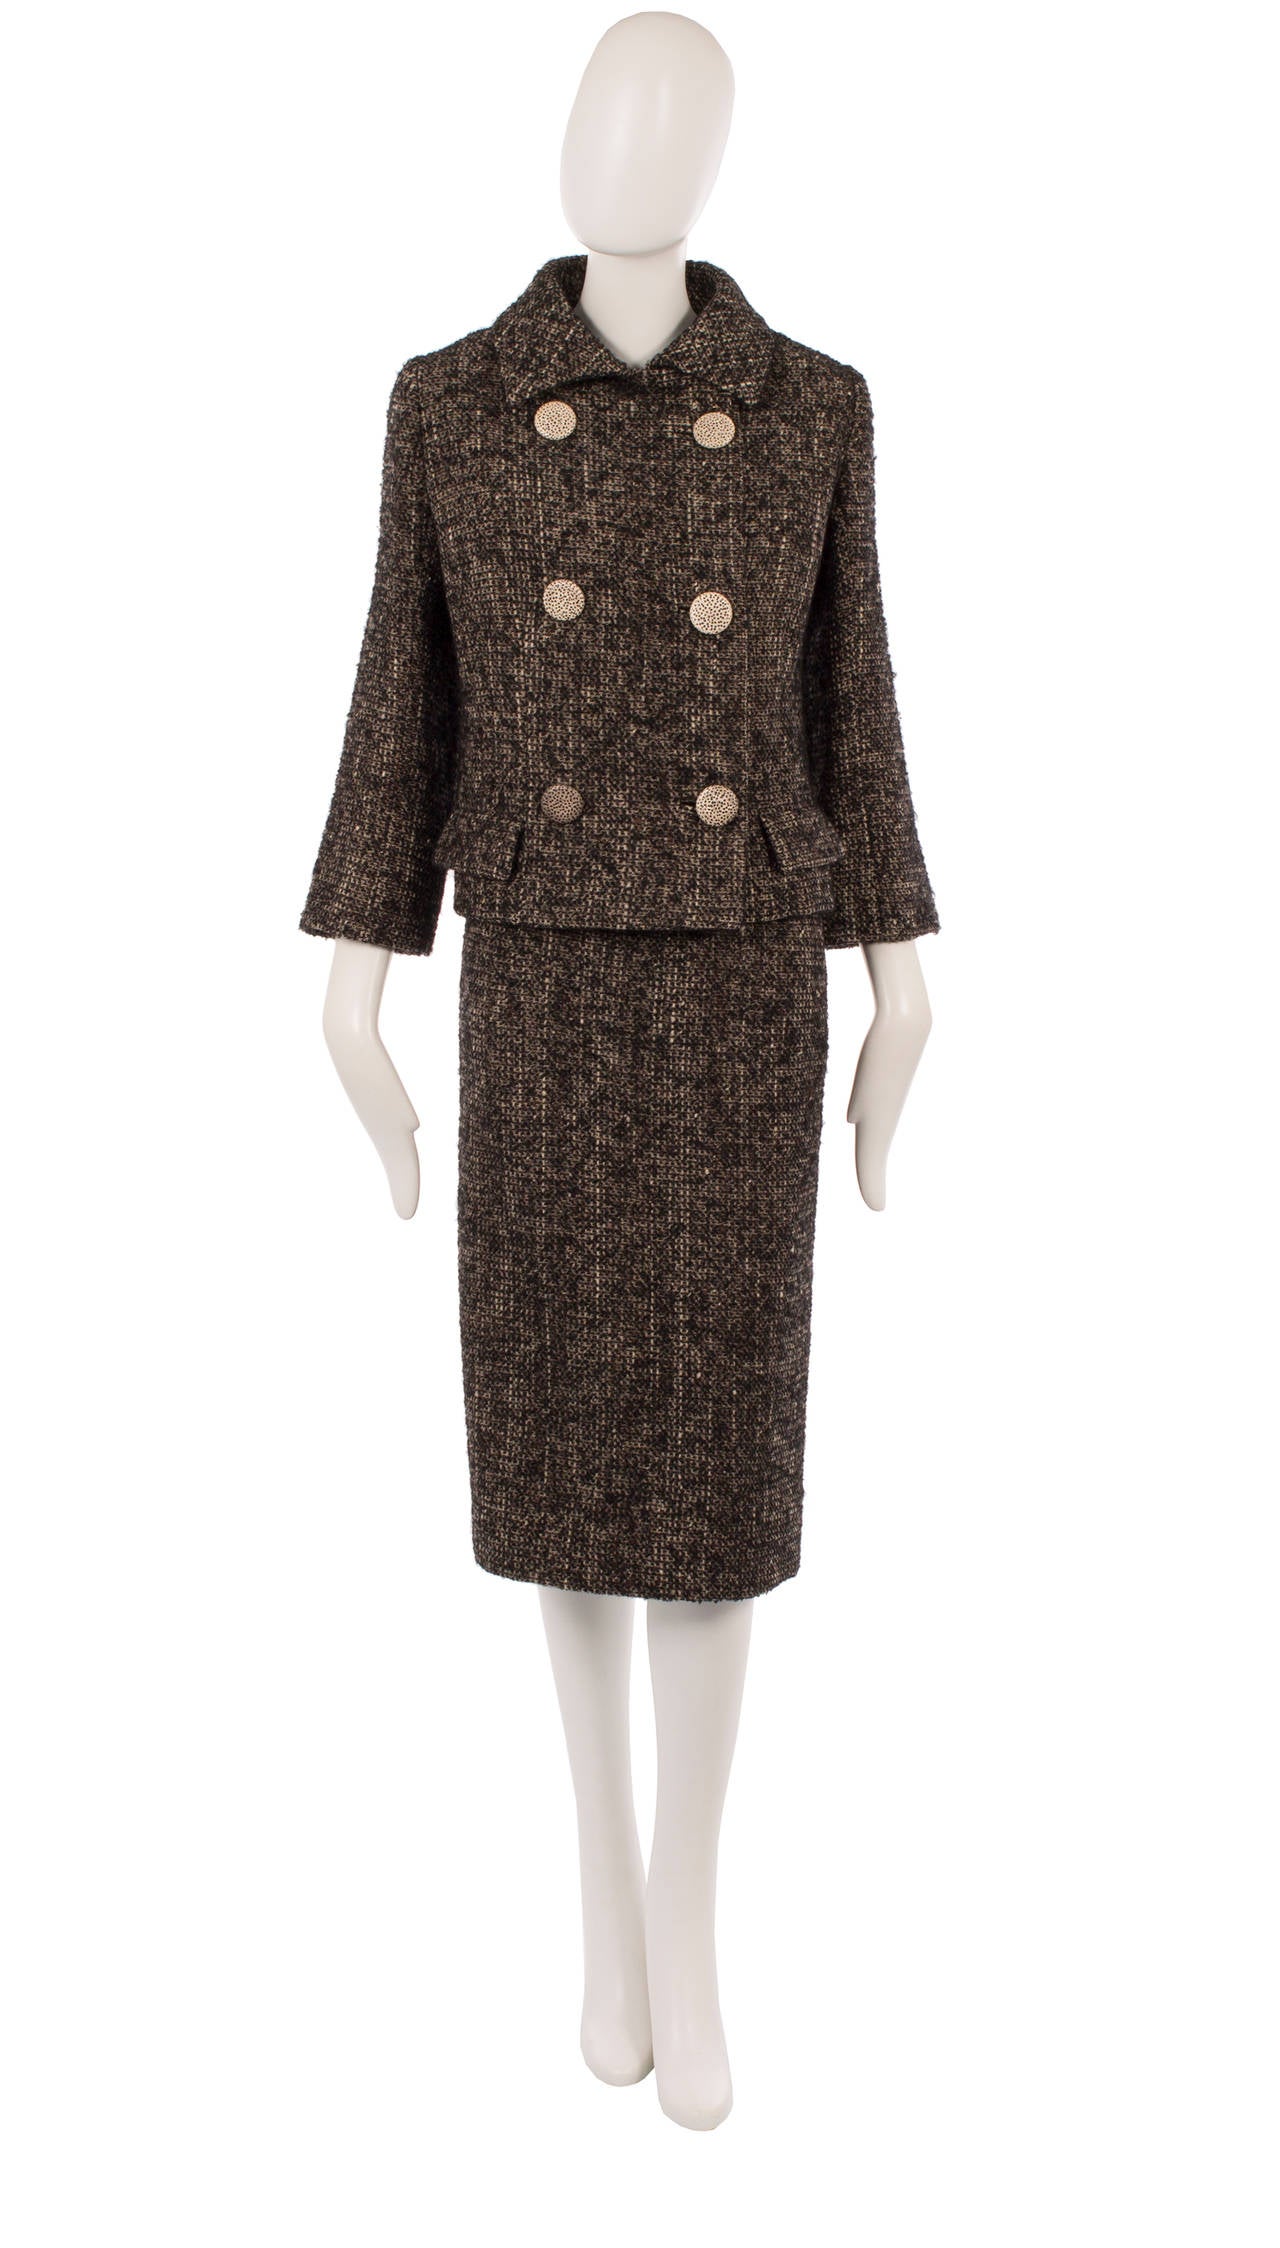 Balenciaga Haute Couture Tweed Skirt Suit, Circa 1967 For Sale at 1stdibs